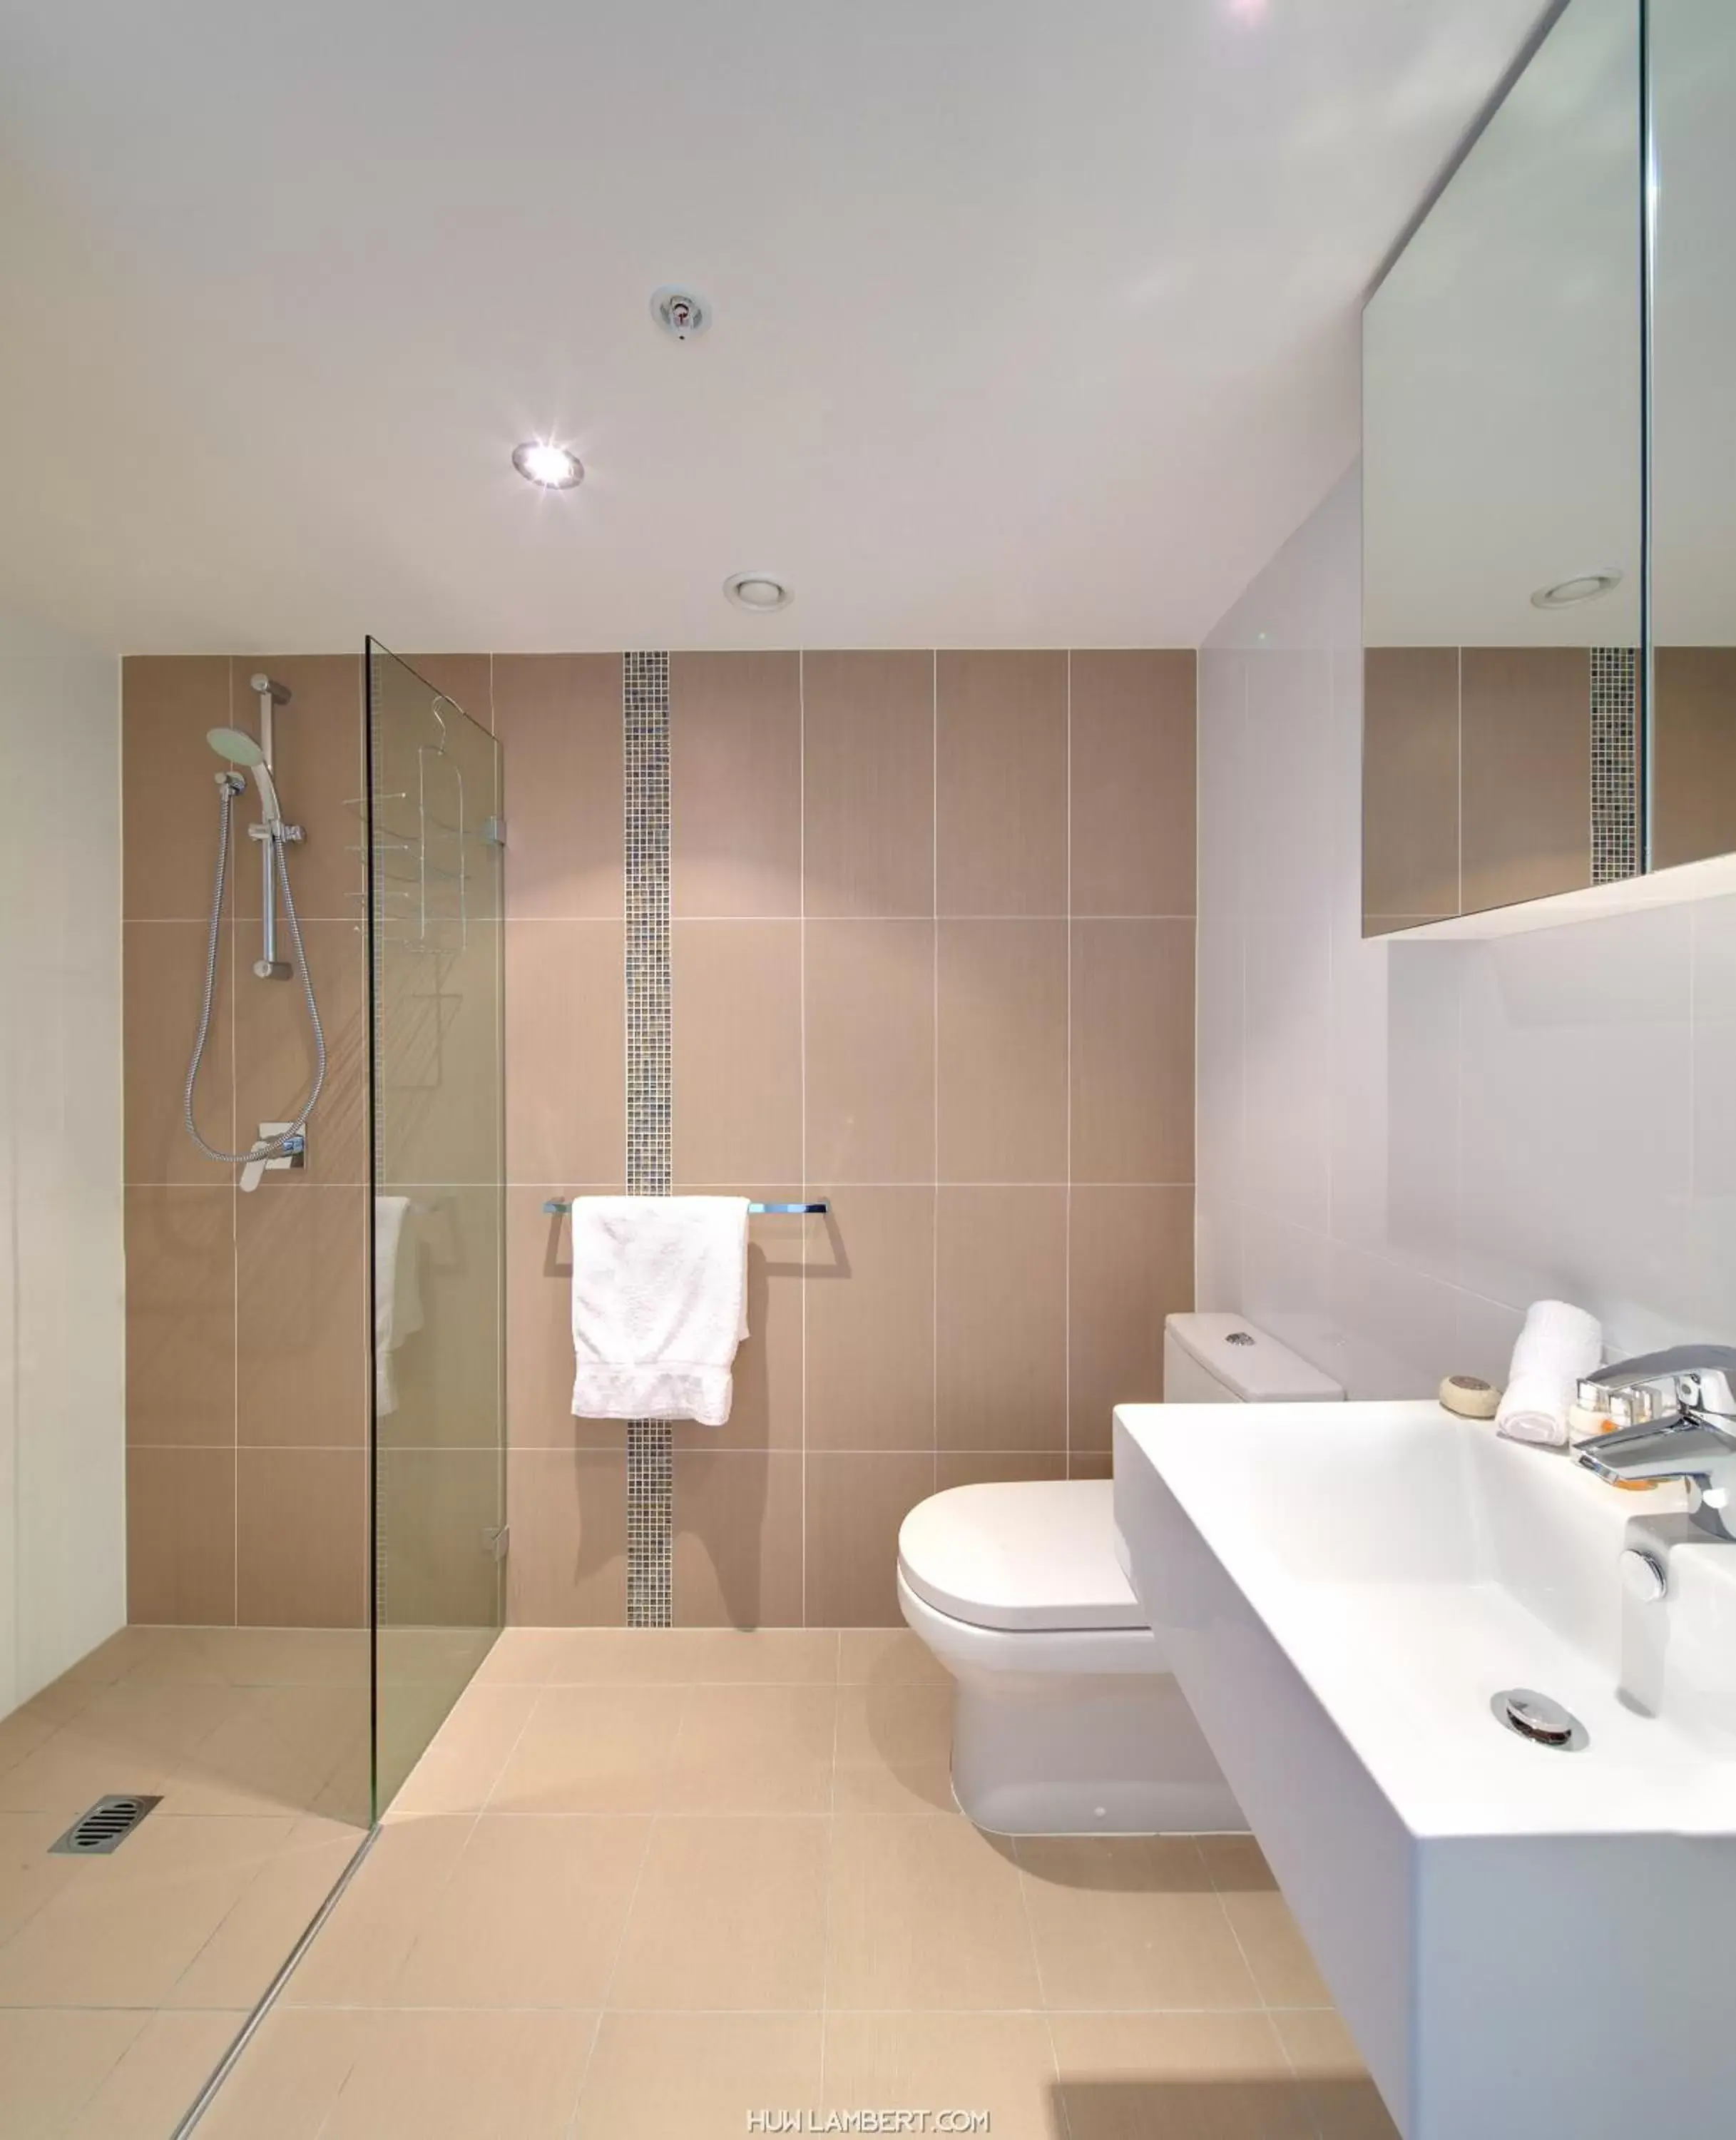 Bathroom in Zara Tower – Luxury Suites and Apartments